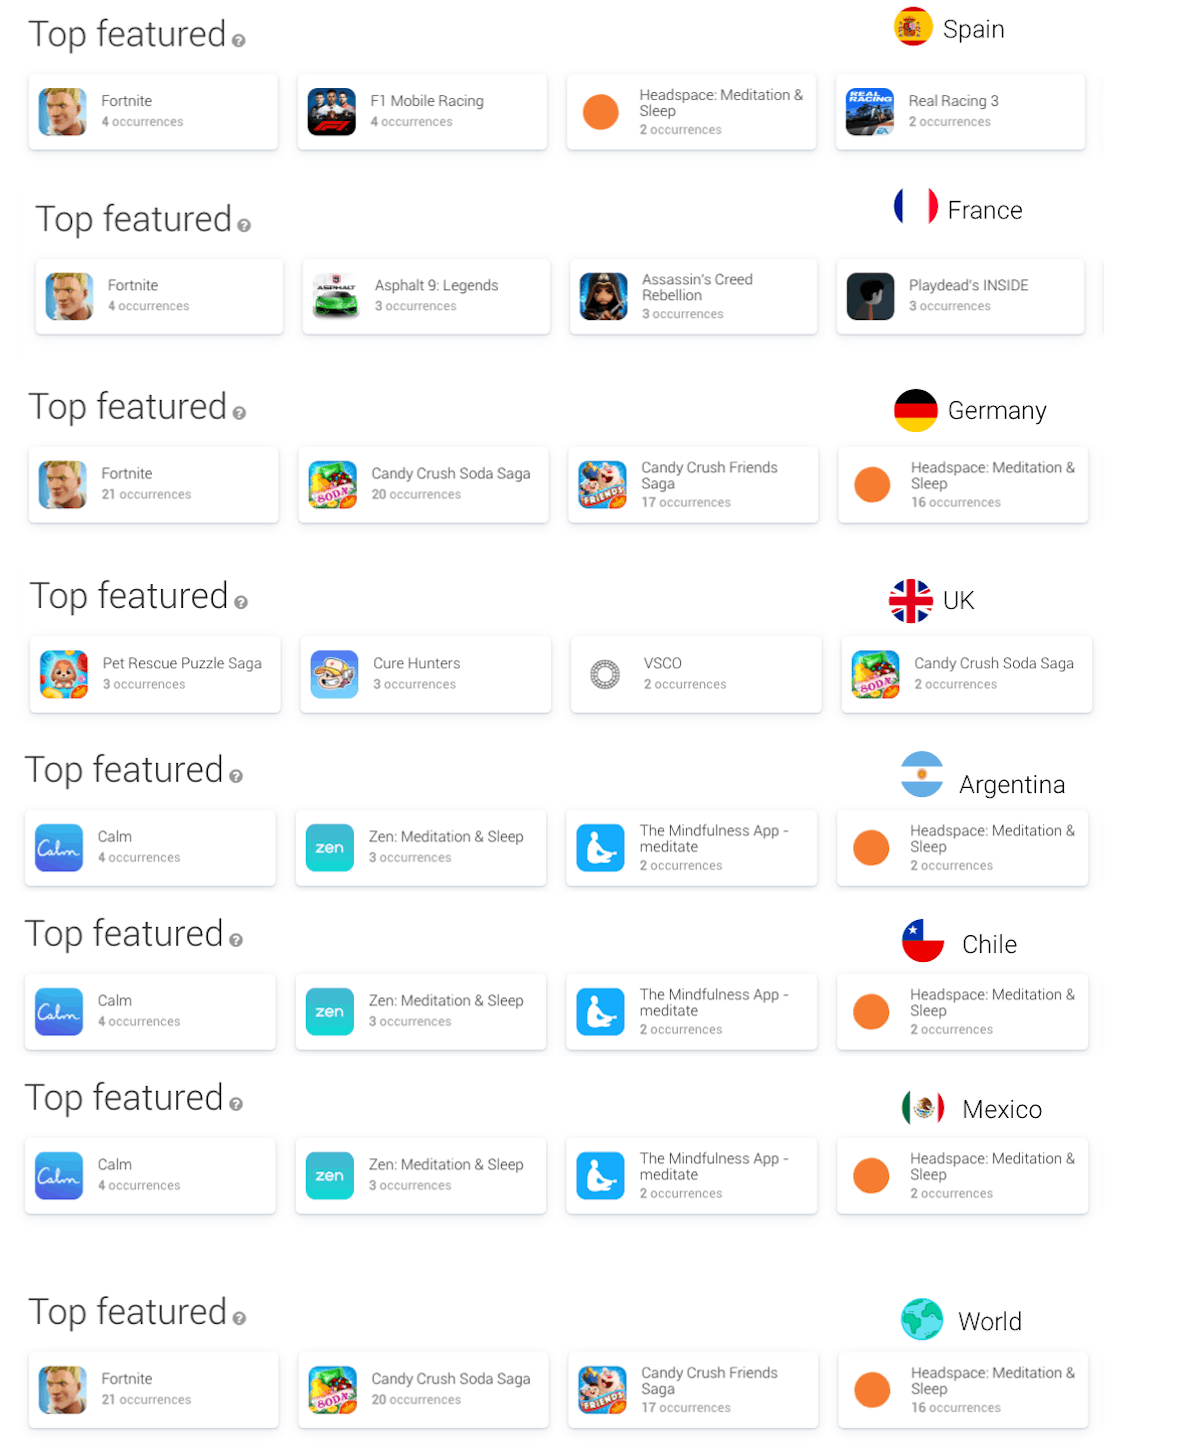 Most featured apps across different countries over March 2019